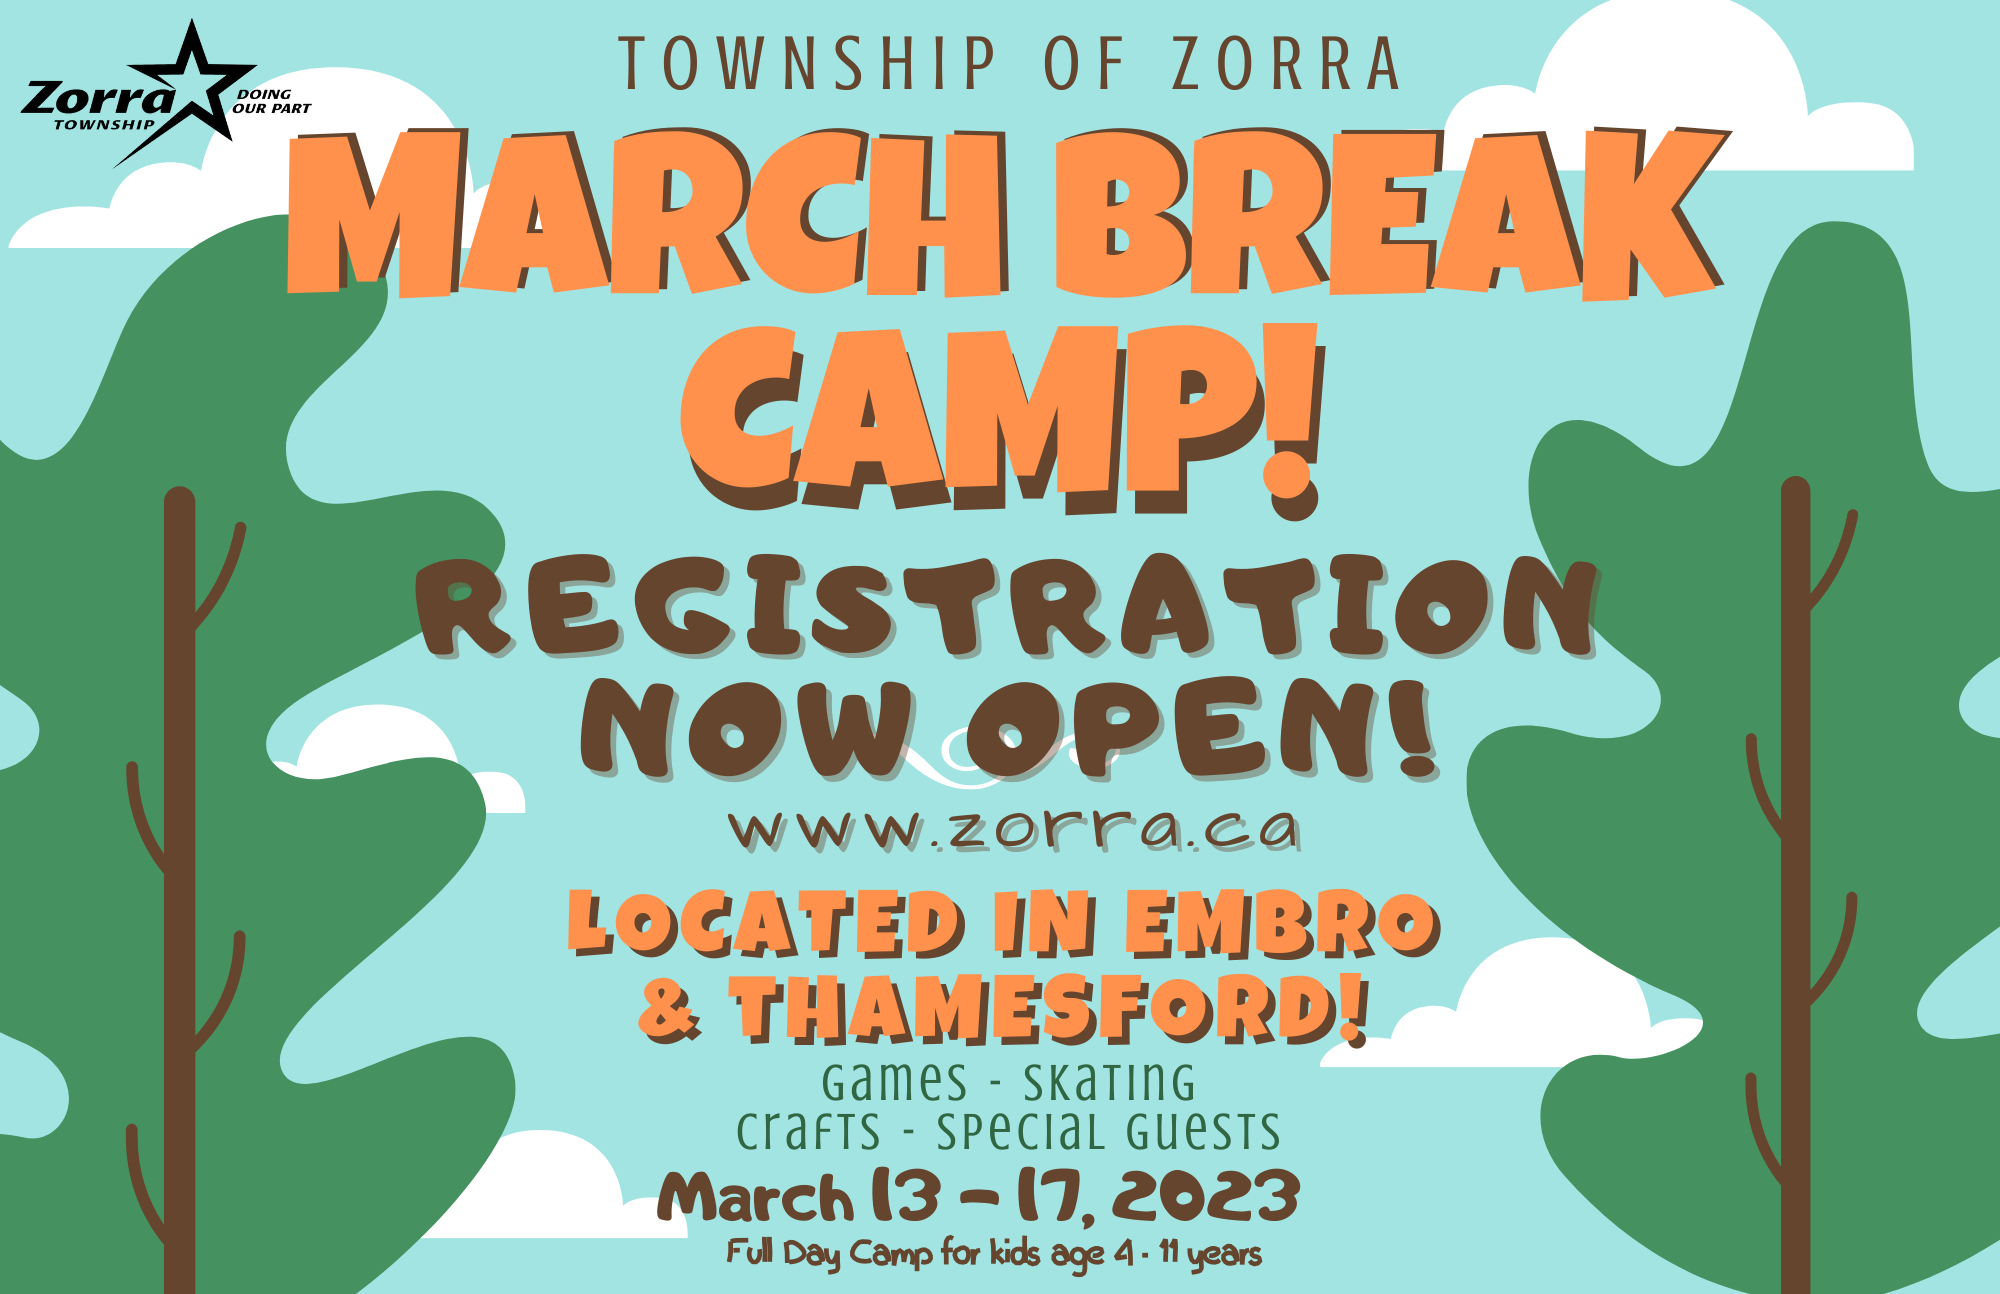 Summer camp flyer - for an accessible version, please contact the Township of Zorra at 519-485-2490